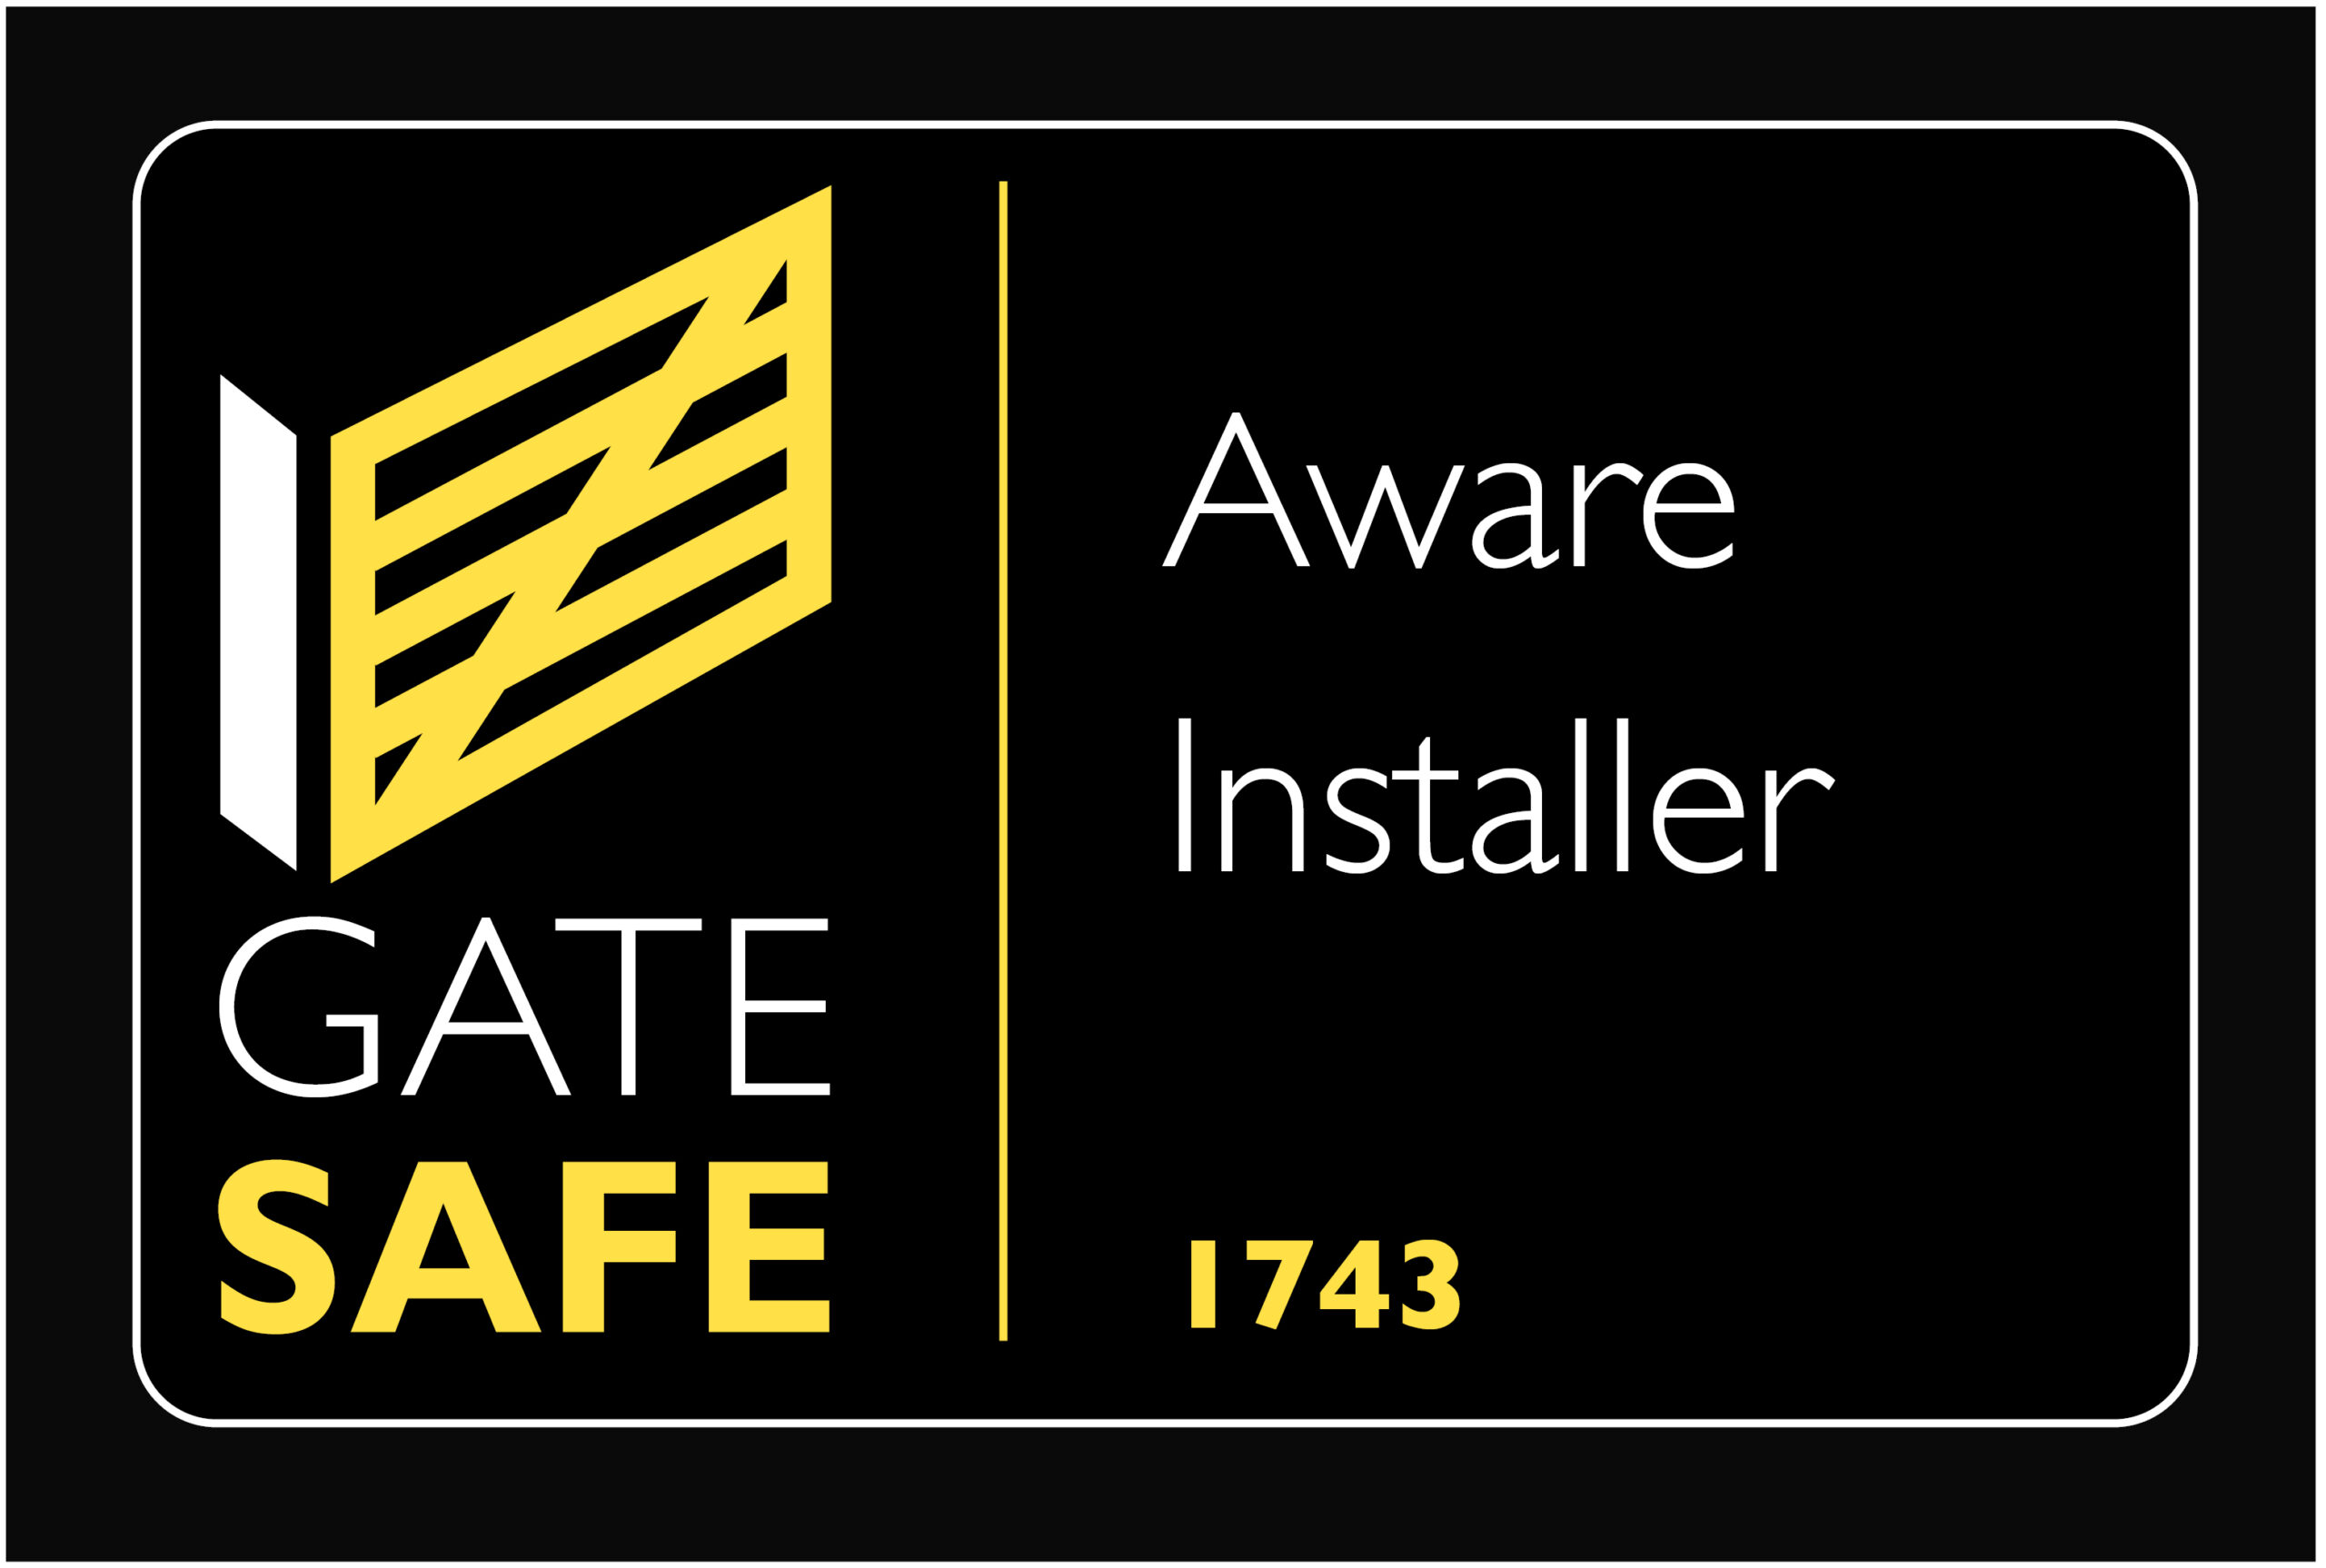 Gate safe logo company 1743 Eastwood Security Systems ltd